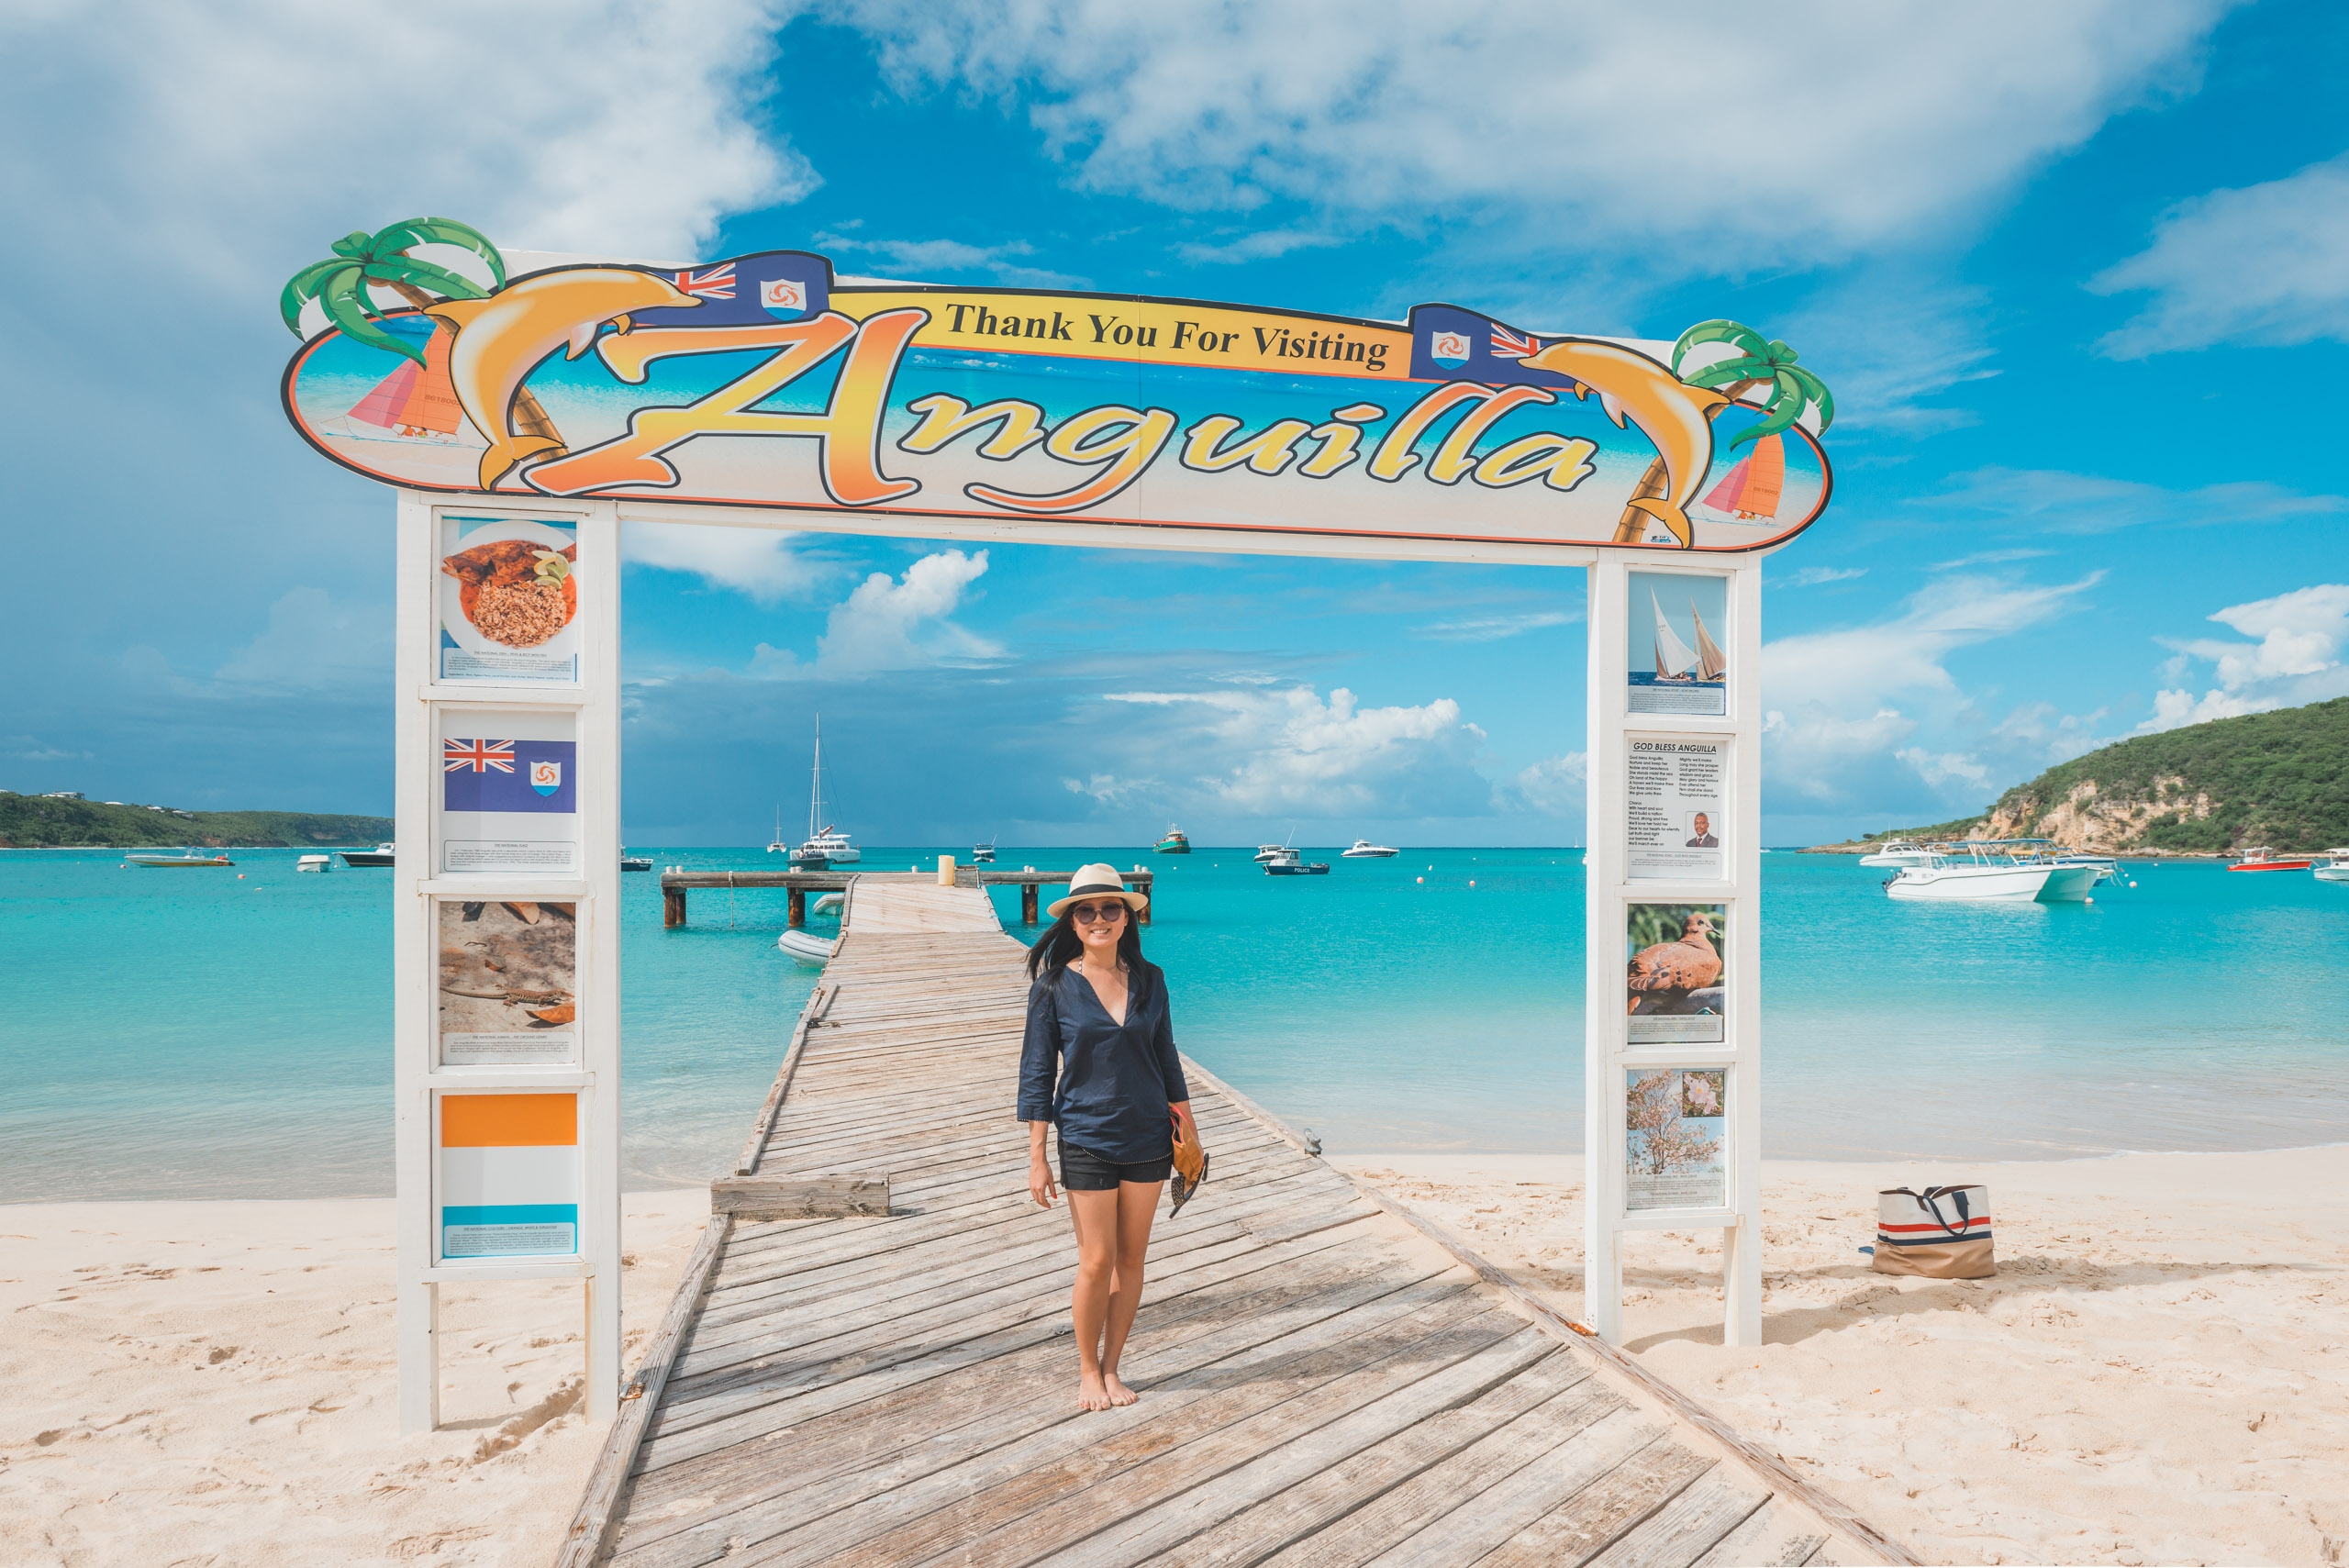 The Anguilla PIer for the St. Maarten Ferry